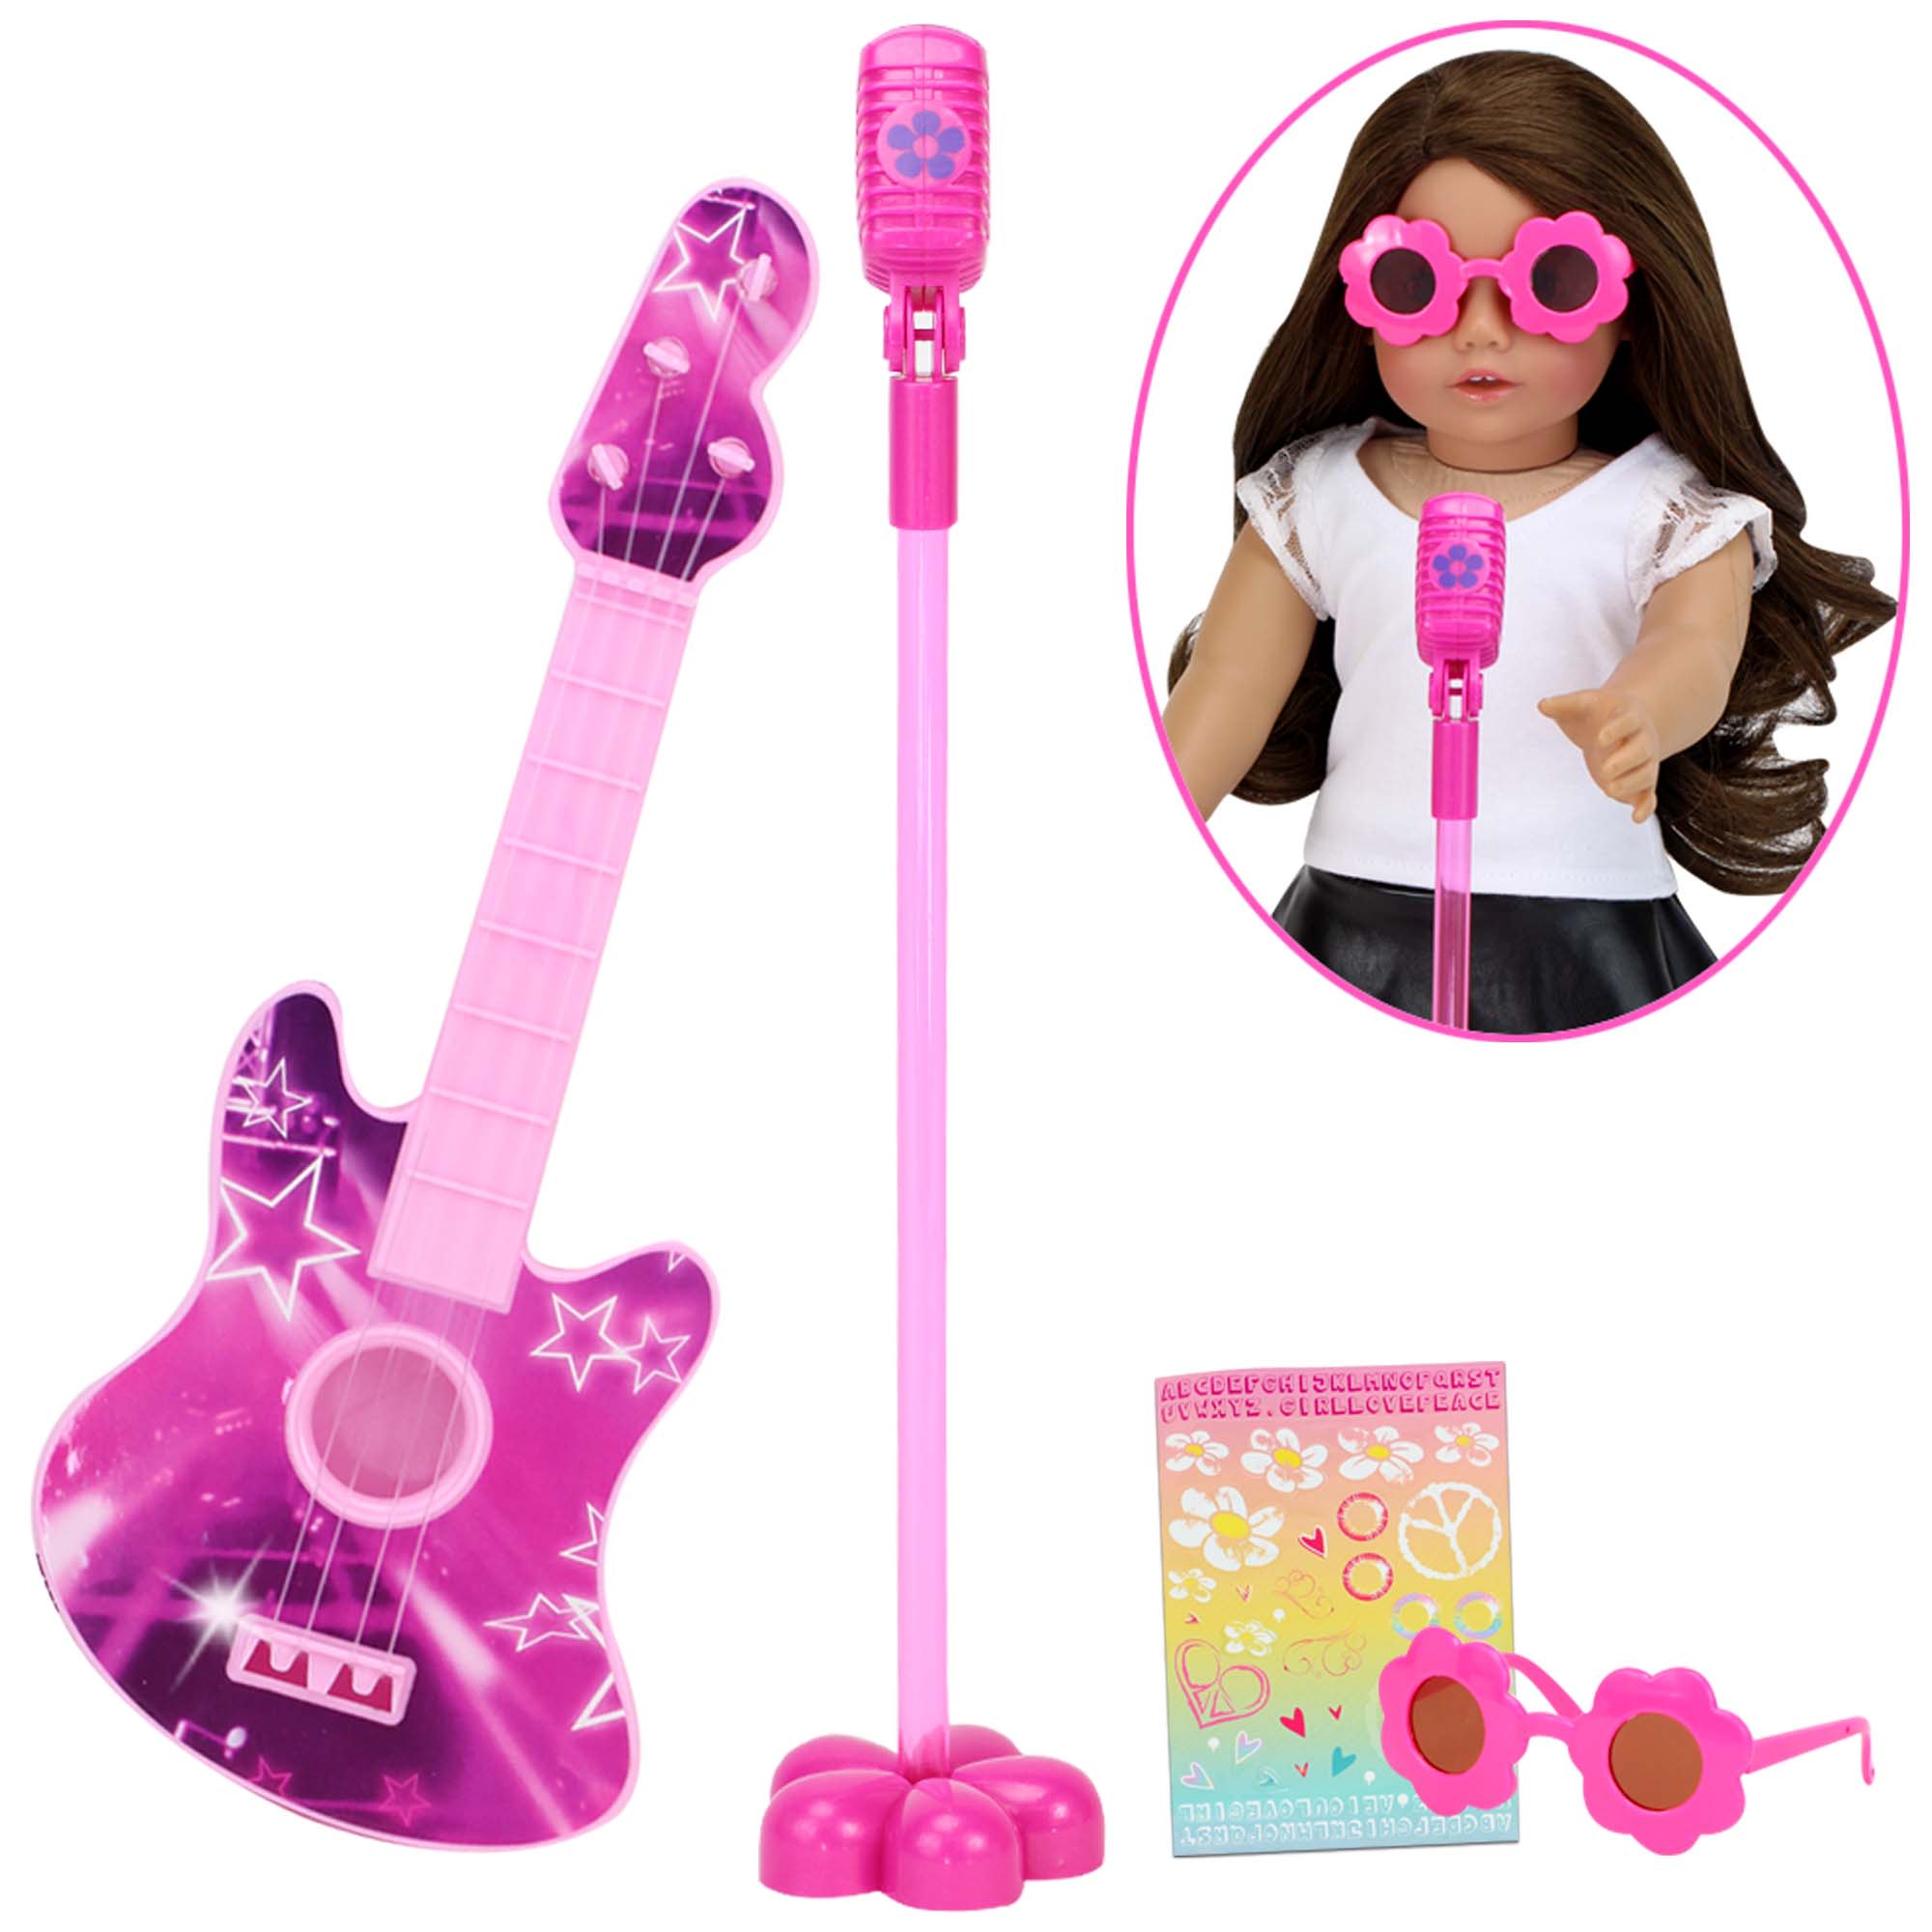 Sophia's Rock 'n Roll Music Set with Guitar, Sunglasses and Microphone for 18" Dolls, Pink